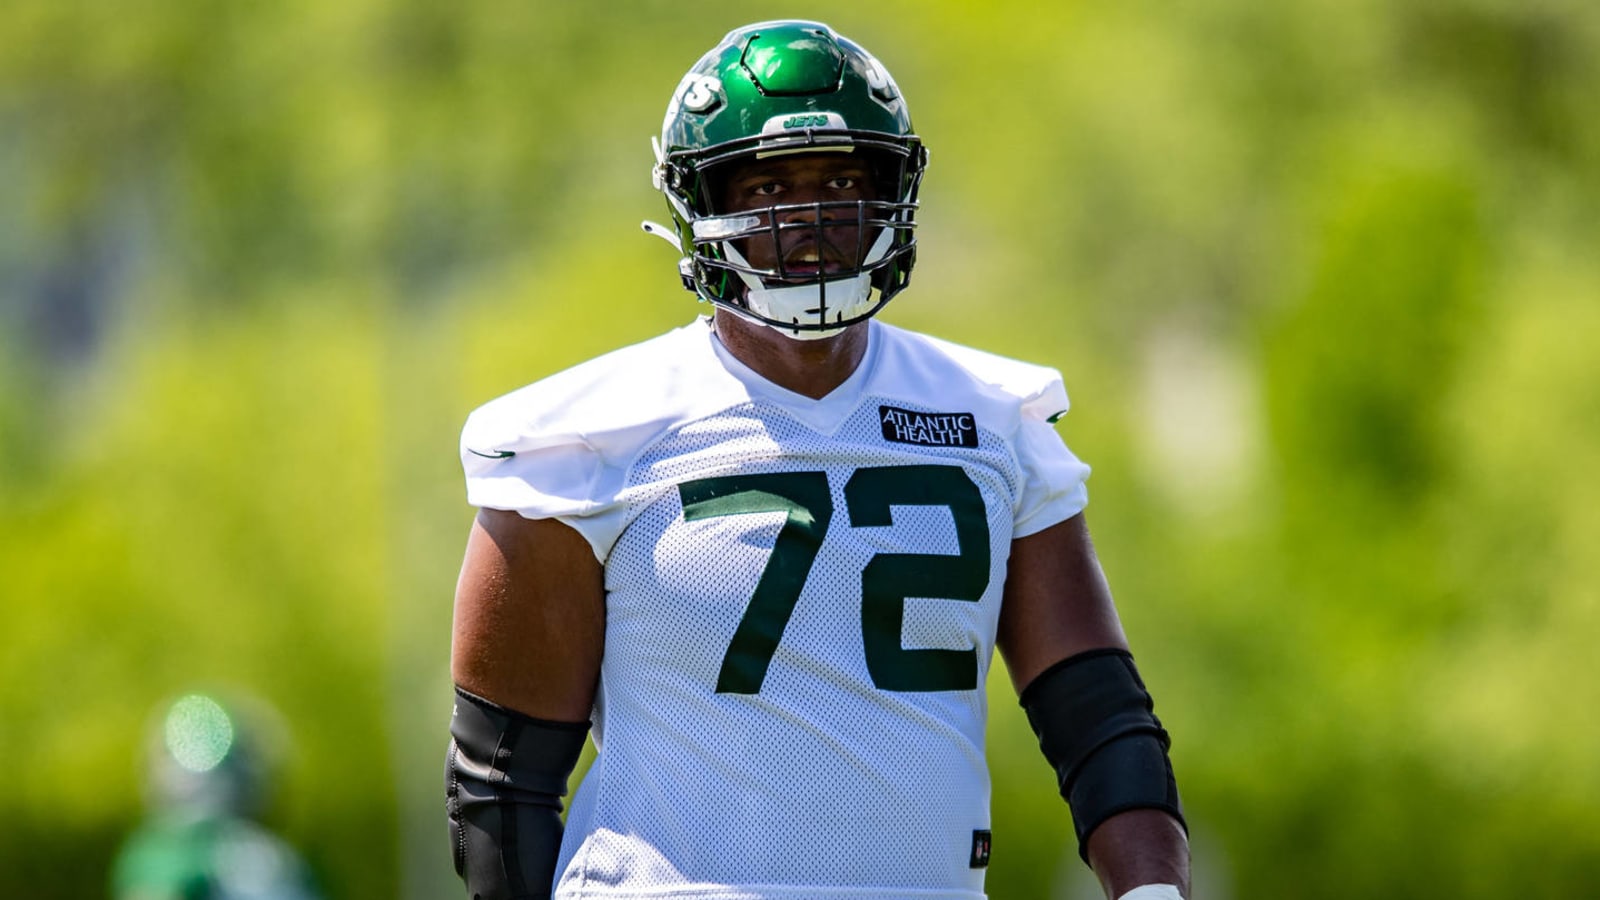 Jets OL Cameron Clark ending career due to risk of paralysis